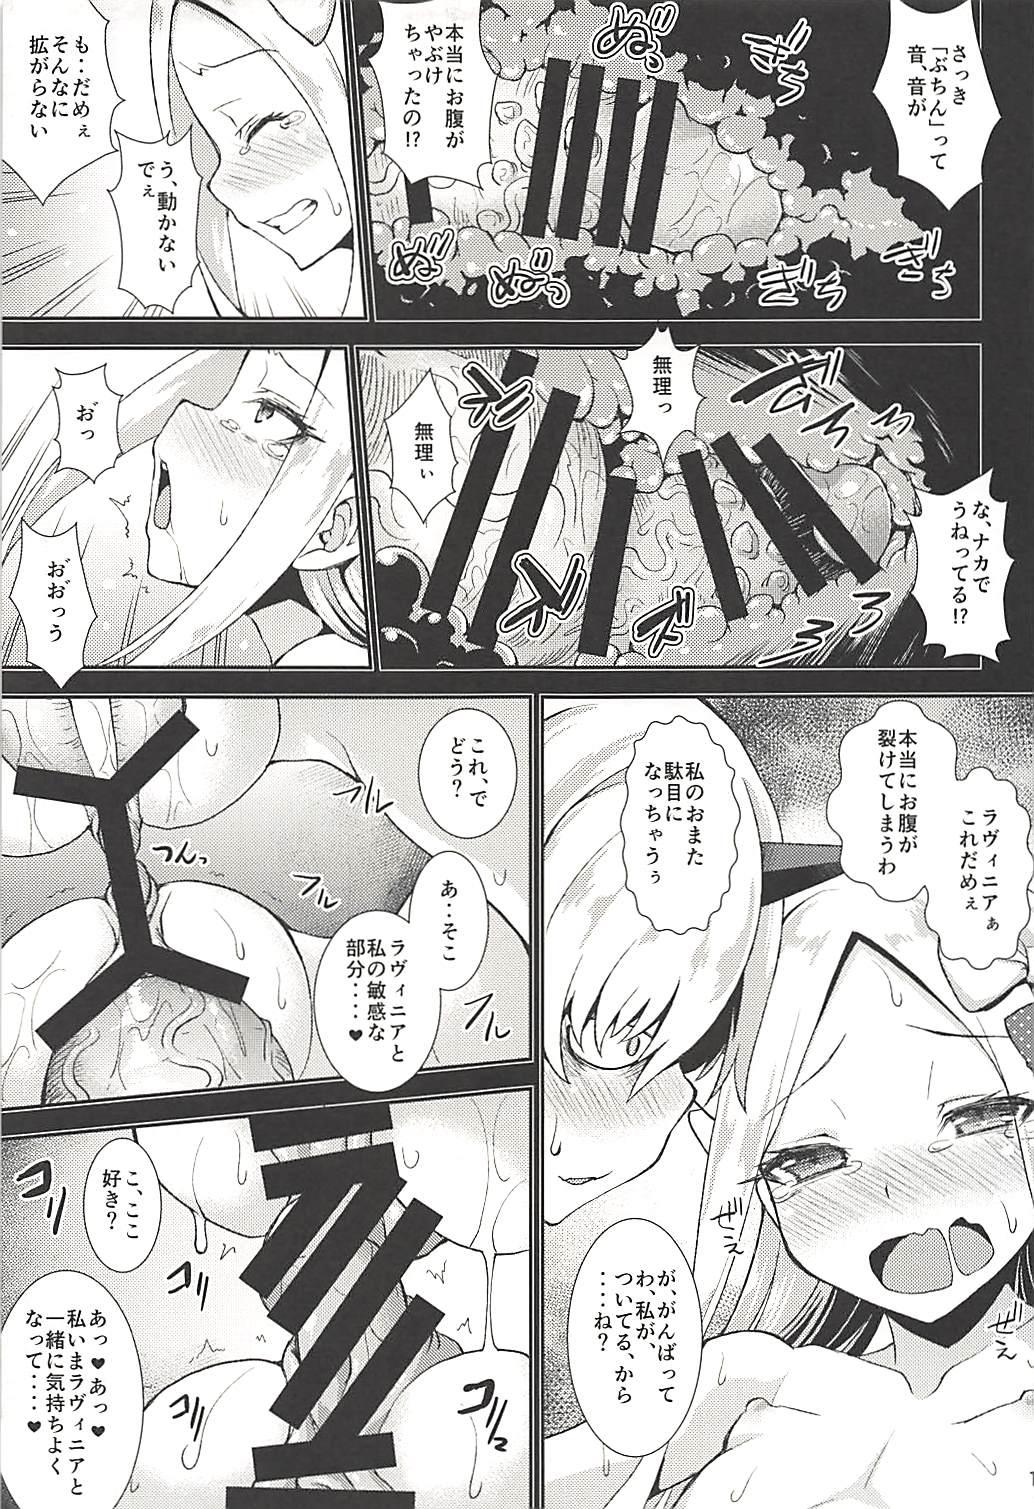 Hardfuck Abby to Yume no Zangeshitsu - Abigail in the Confession chamber of Dream - Fate grand order Big Black Dick - Page 12